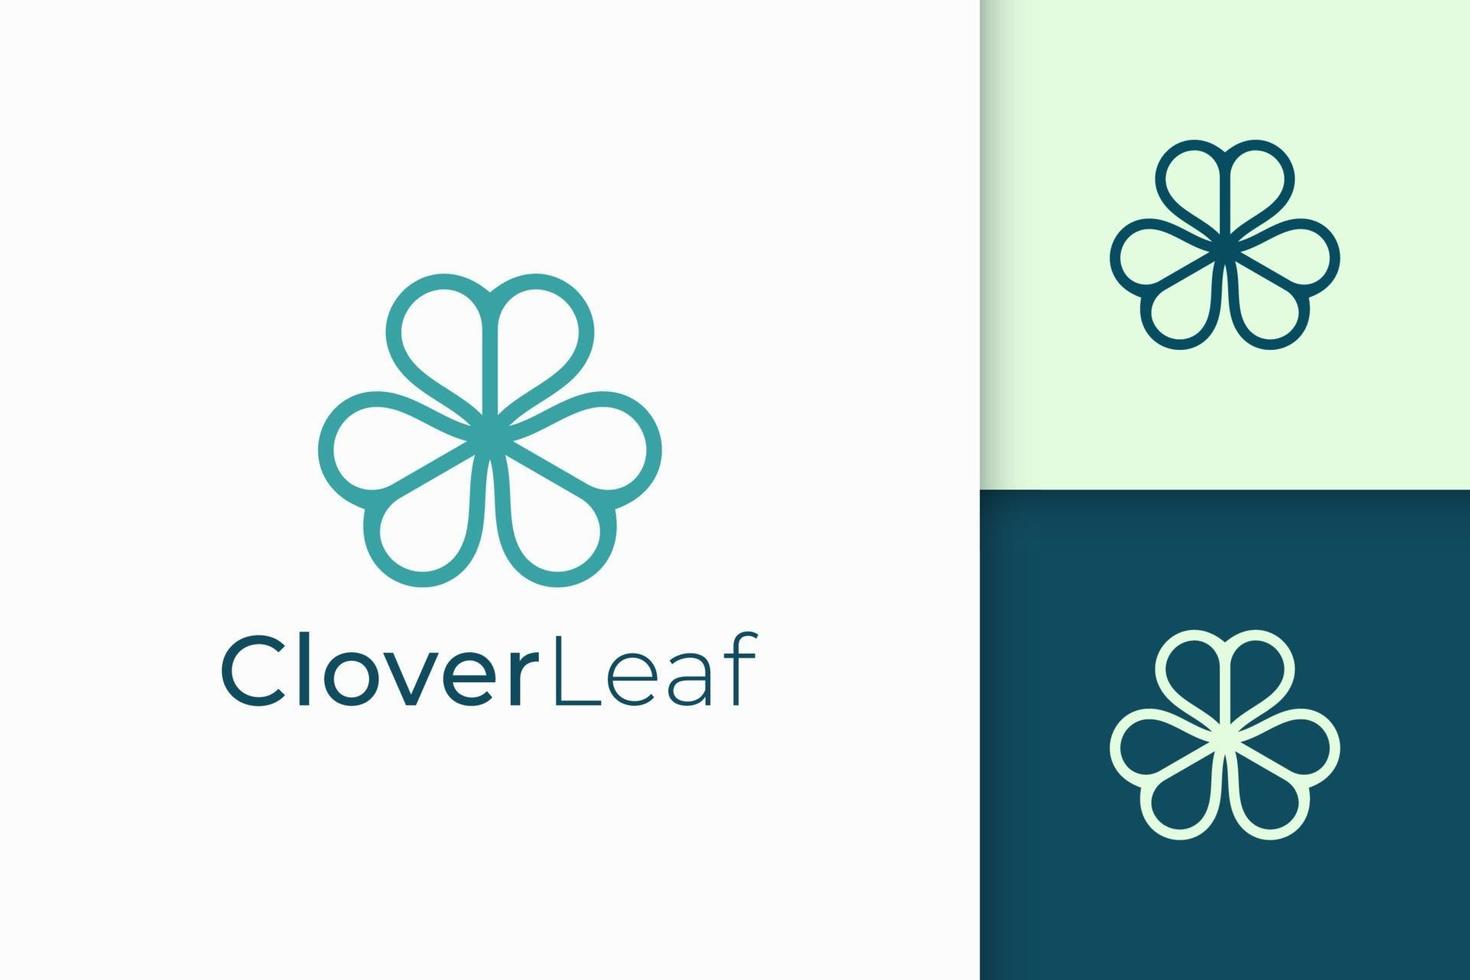 Clover logo in simple line and love shape represent lucky vector